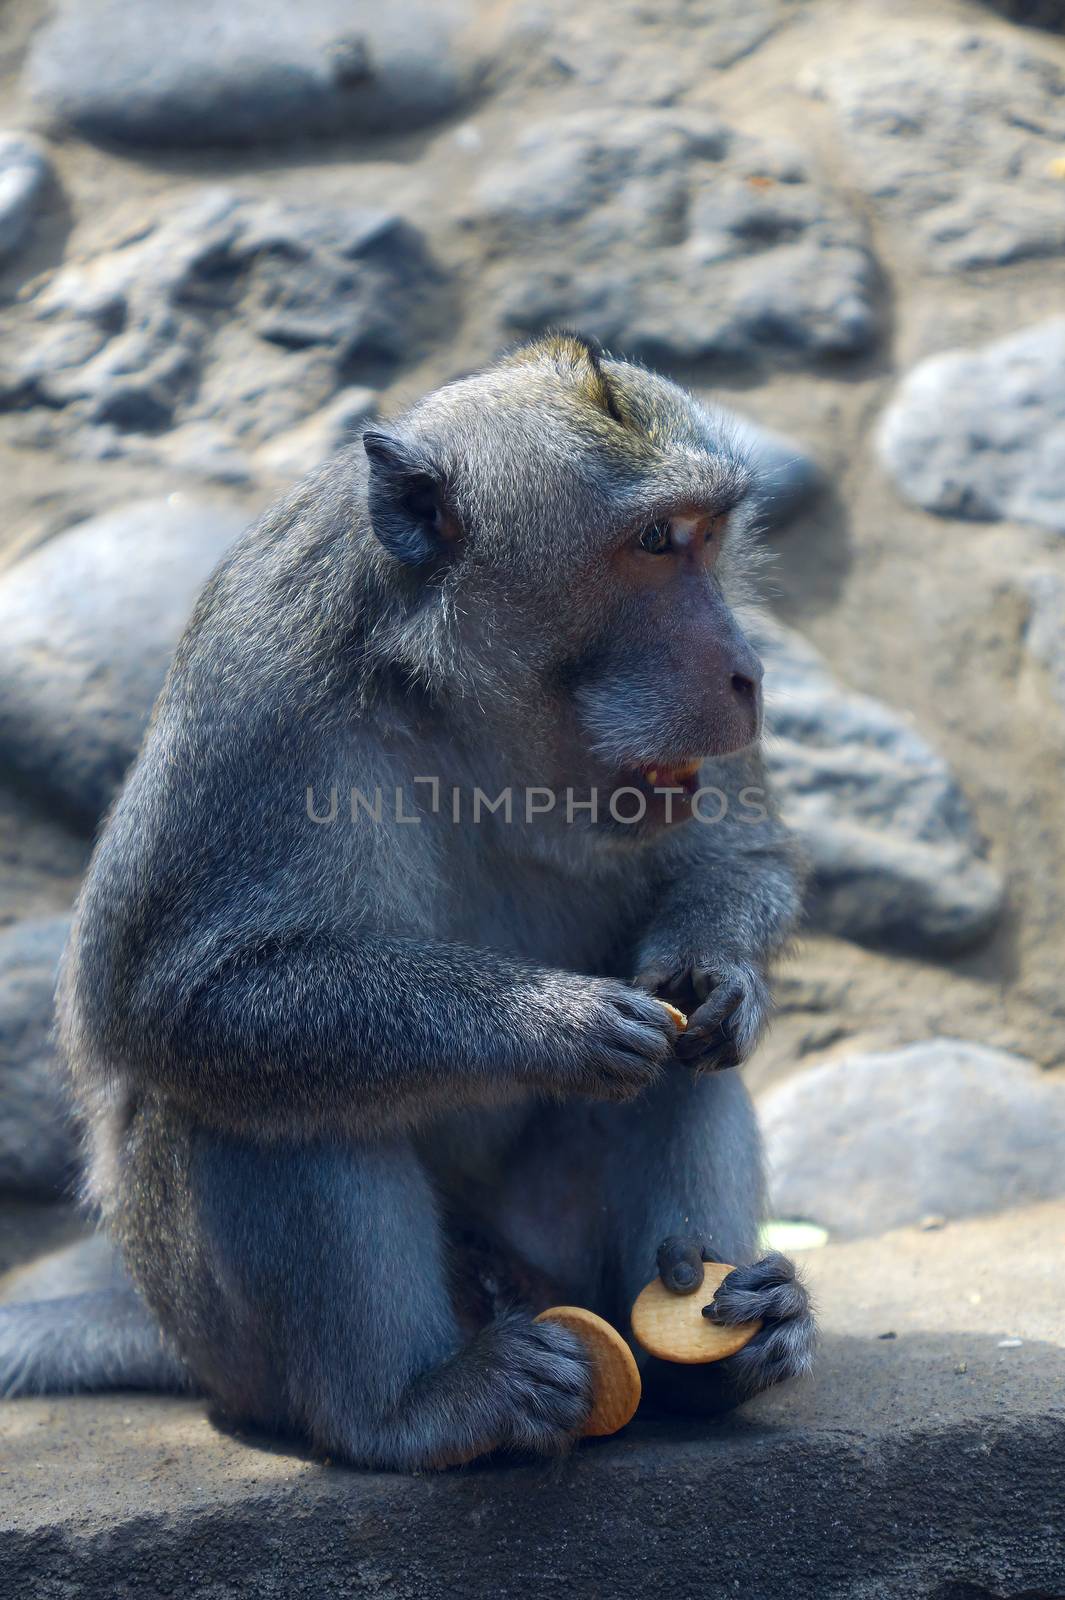 Monkey with cookies in Bali by BIG_TAU